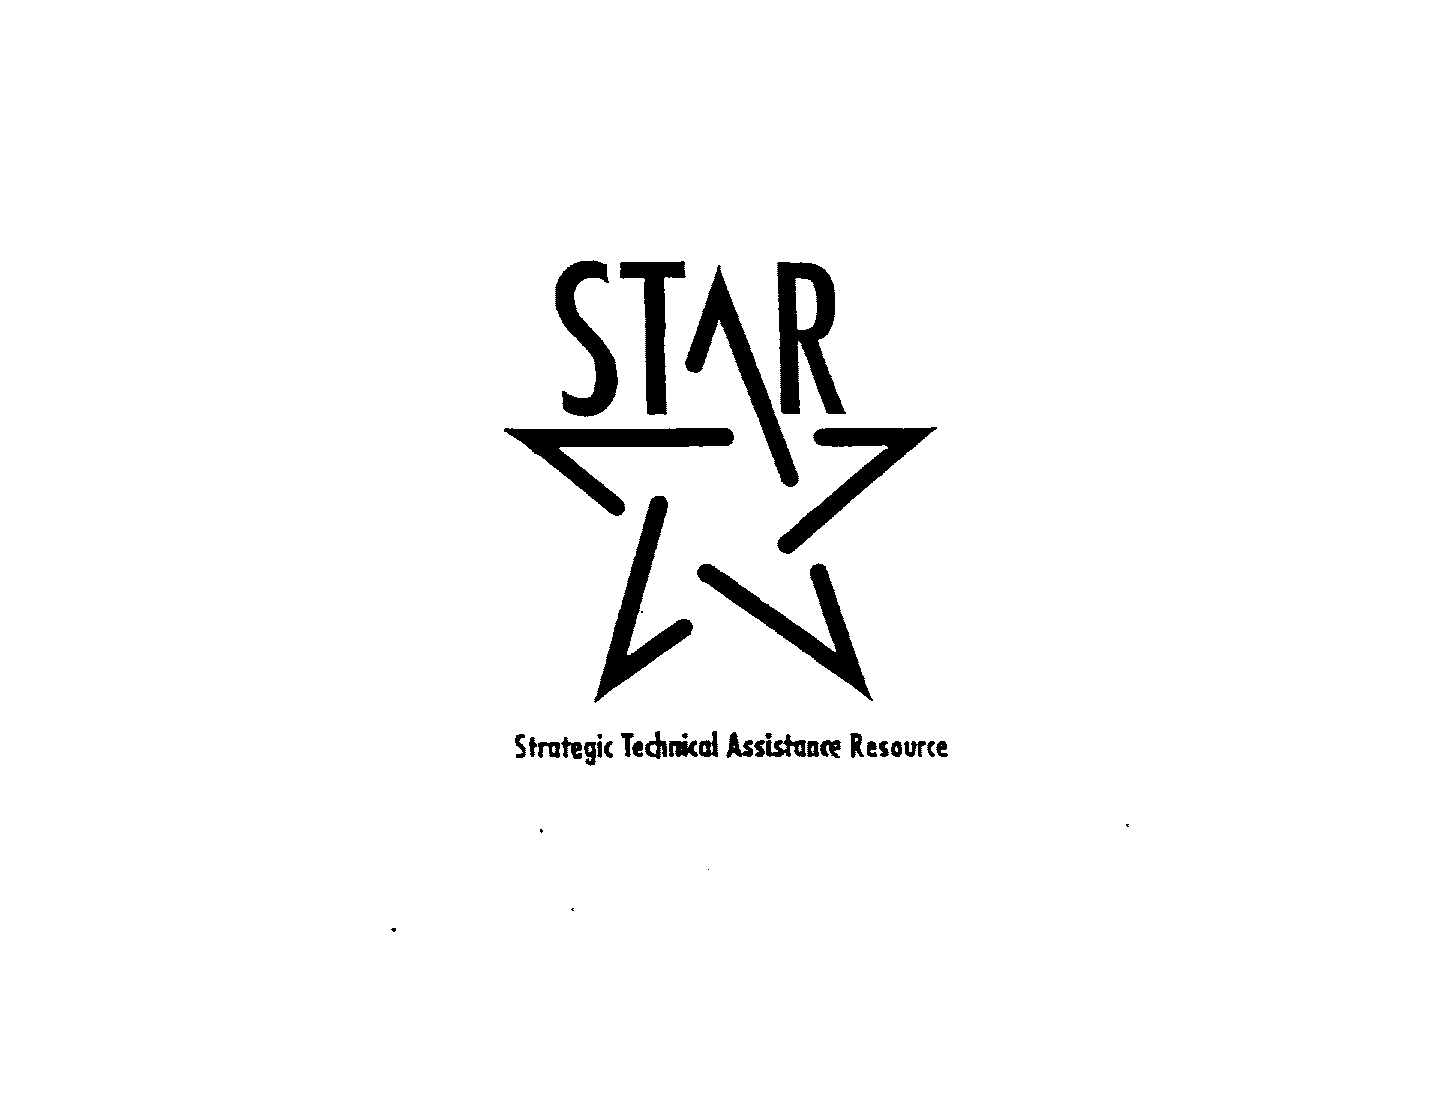  STAR STRATEGIC TECHNICAL ASSISTANCE RESOURCE